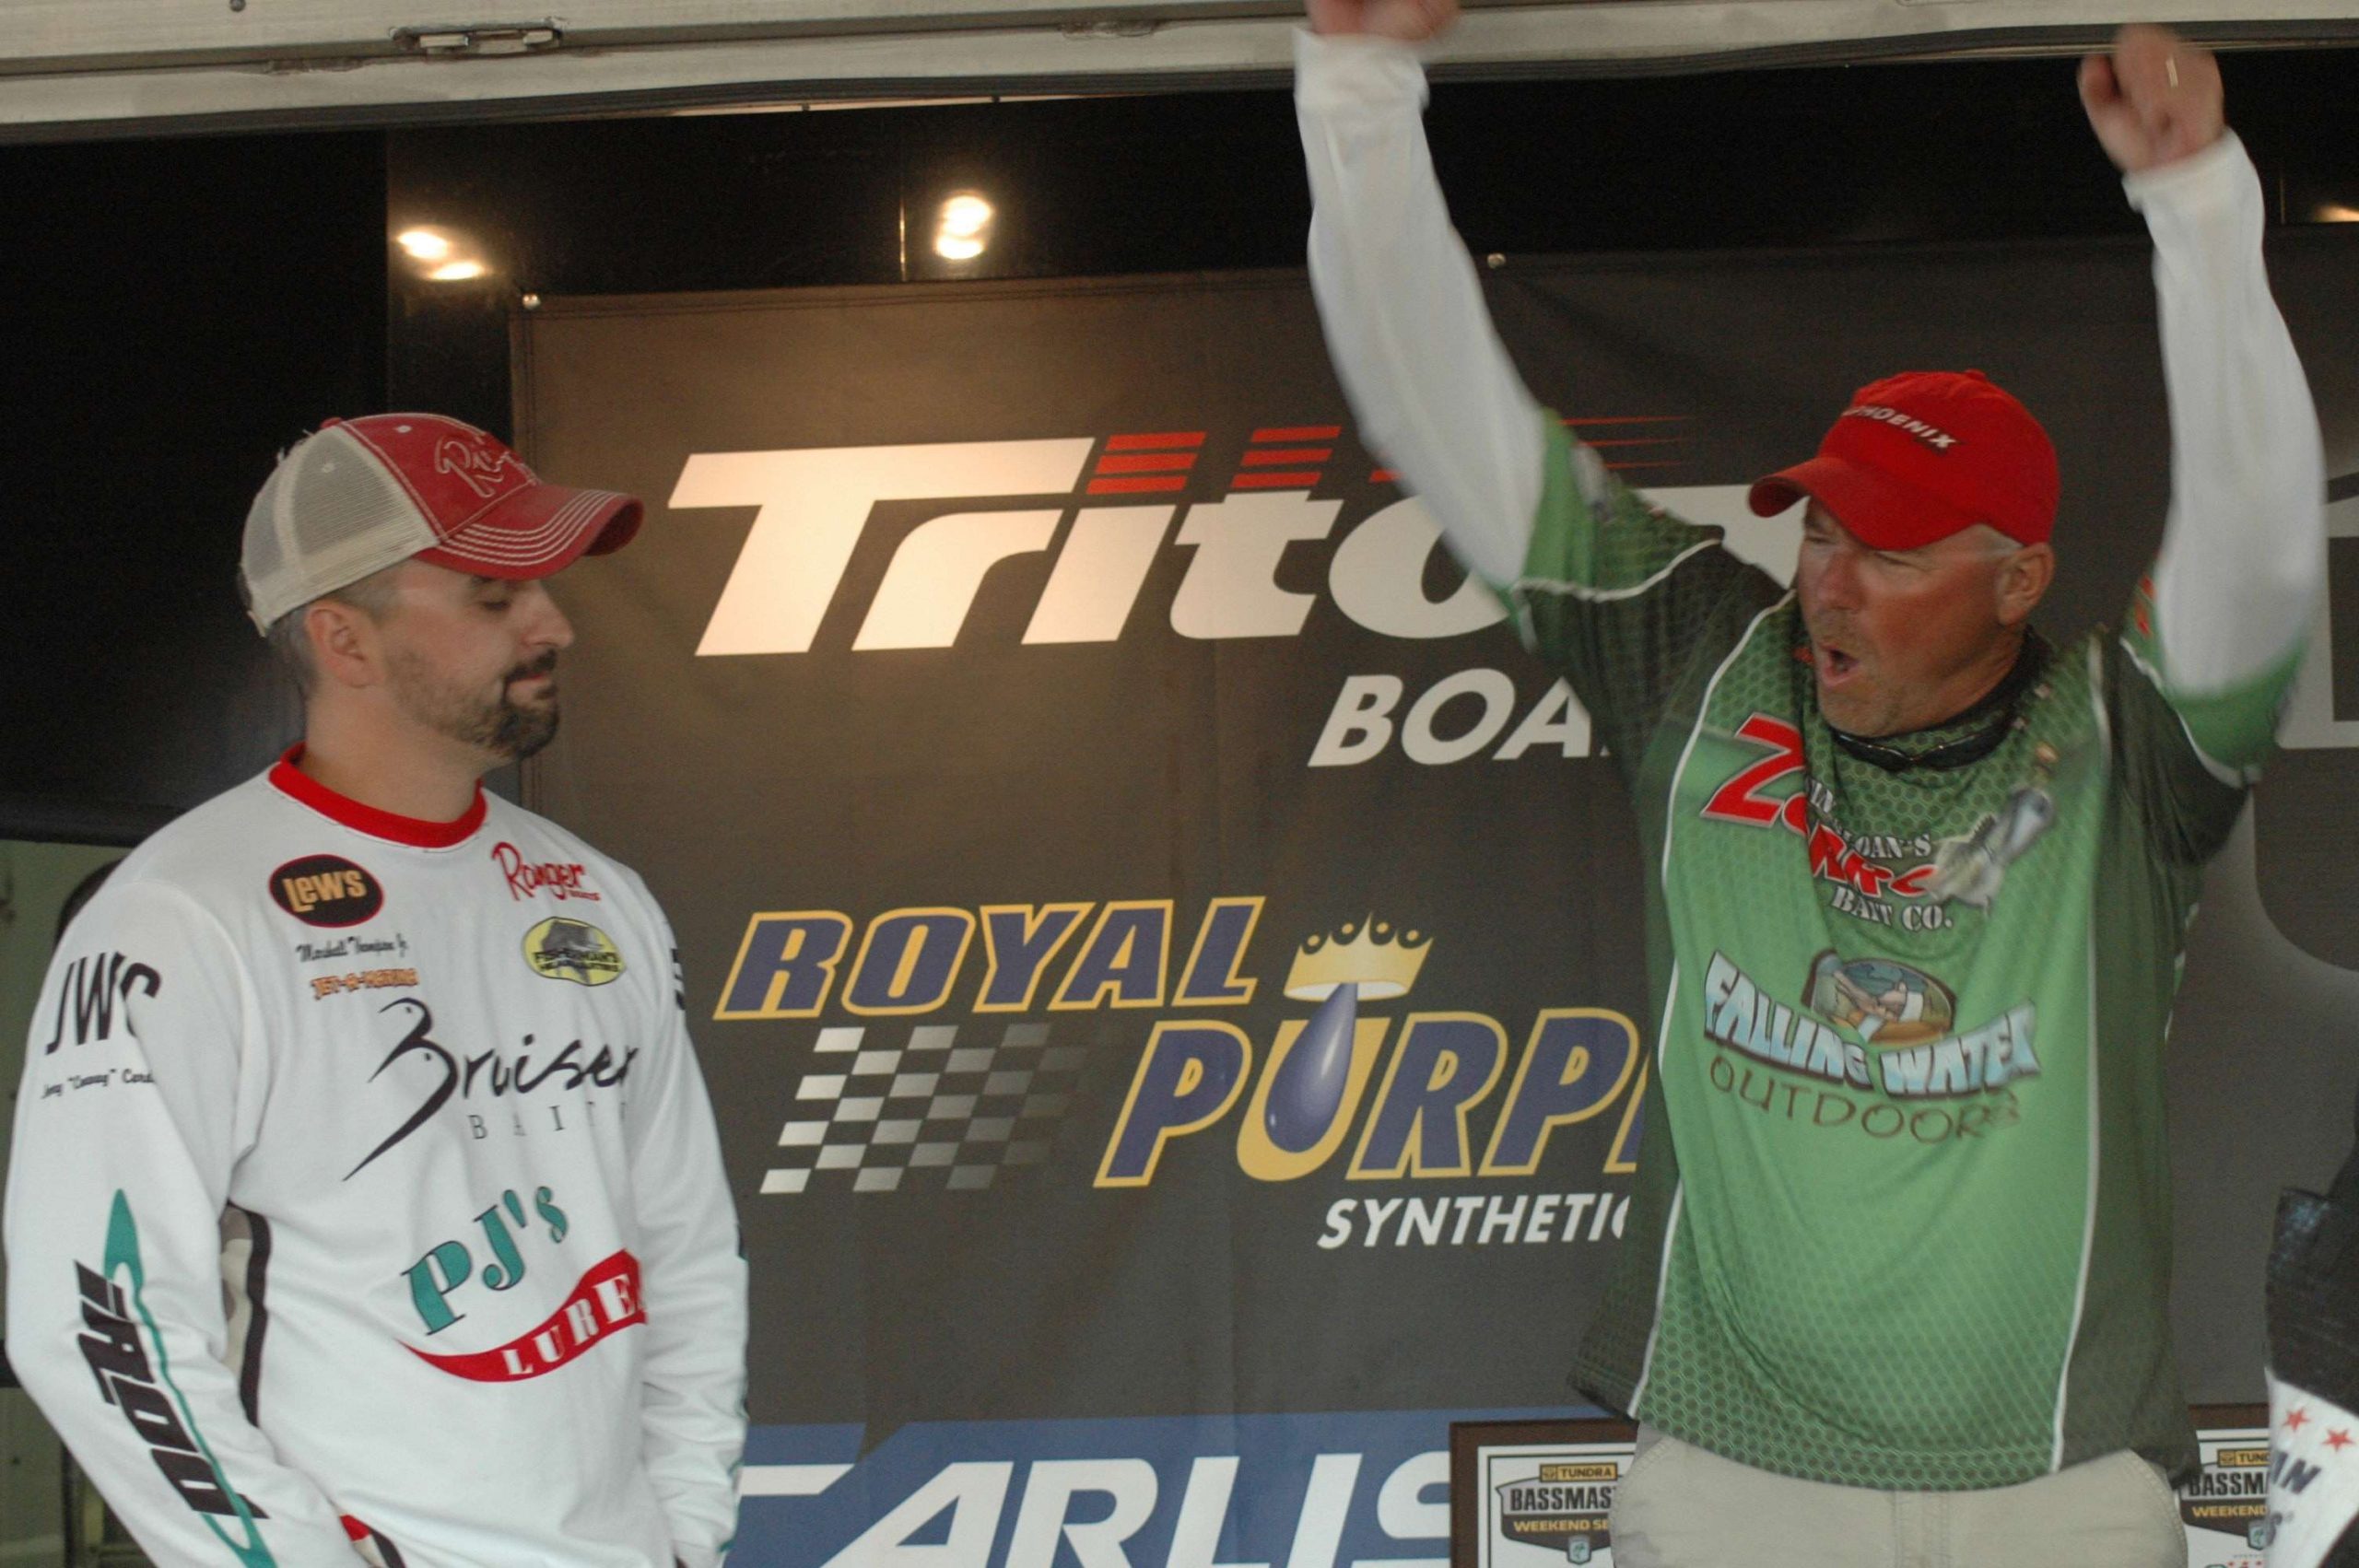 That angler is leader Adam Wagner who raises his arms in victory after his fish are weighed. Standing beside him is runner up Marshall Thompson. 